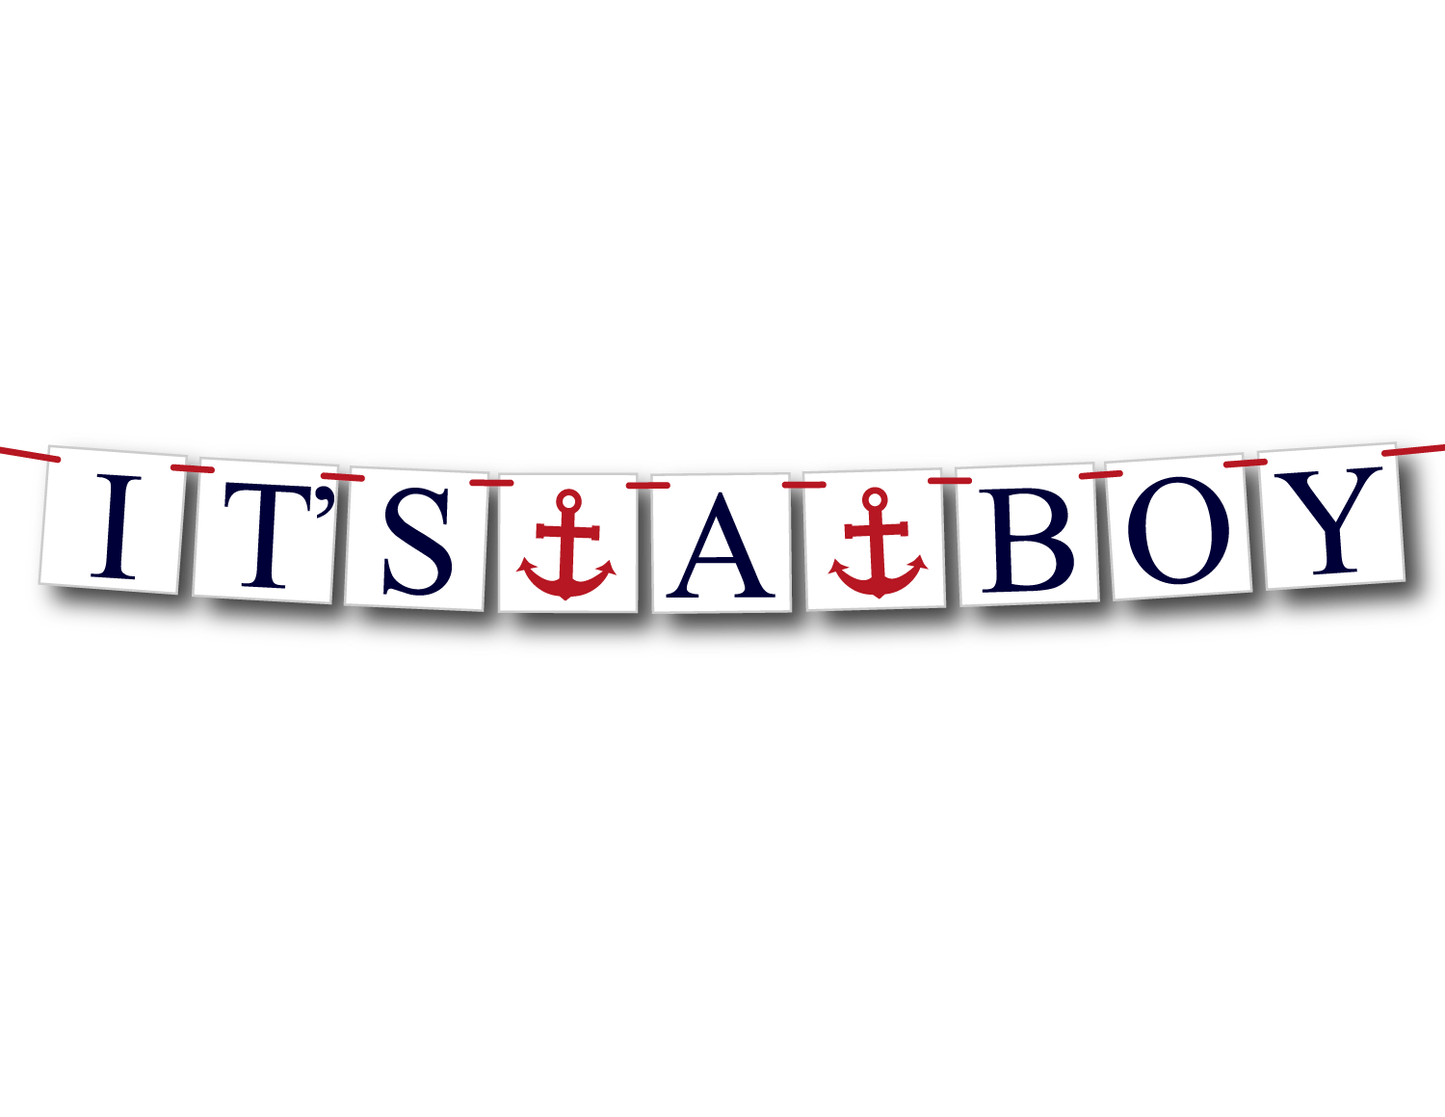 nautical it's a boy banner - Celebrating Together